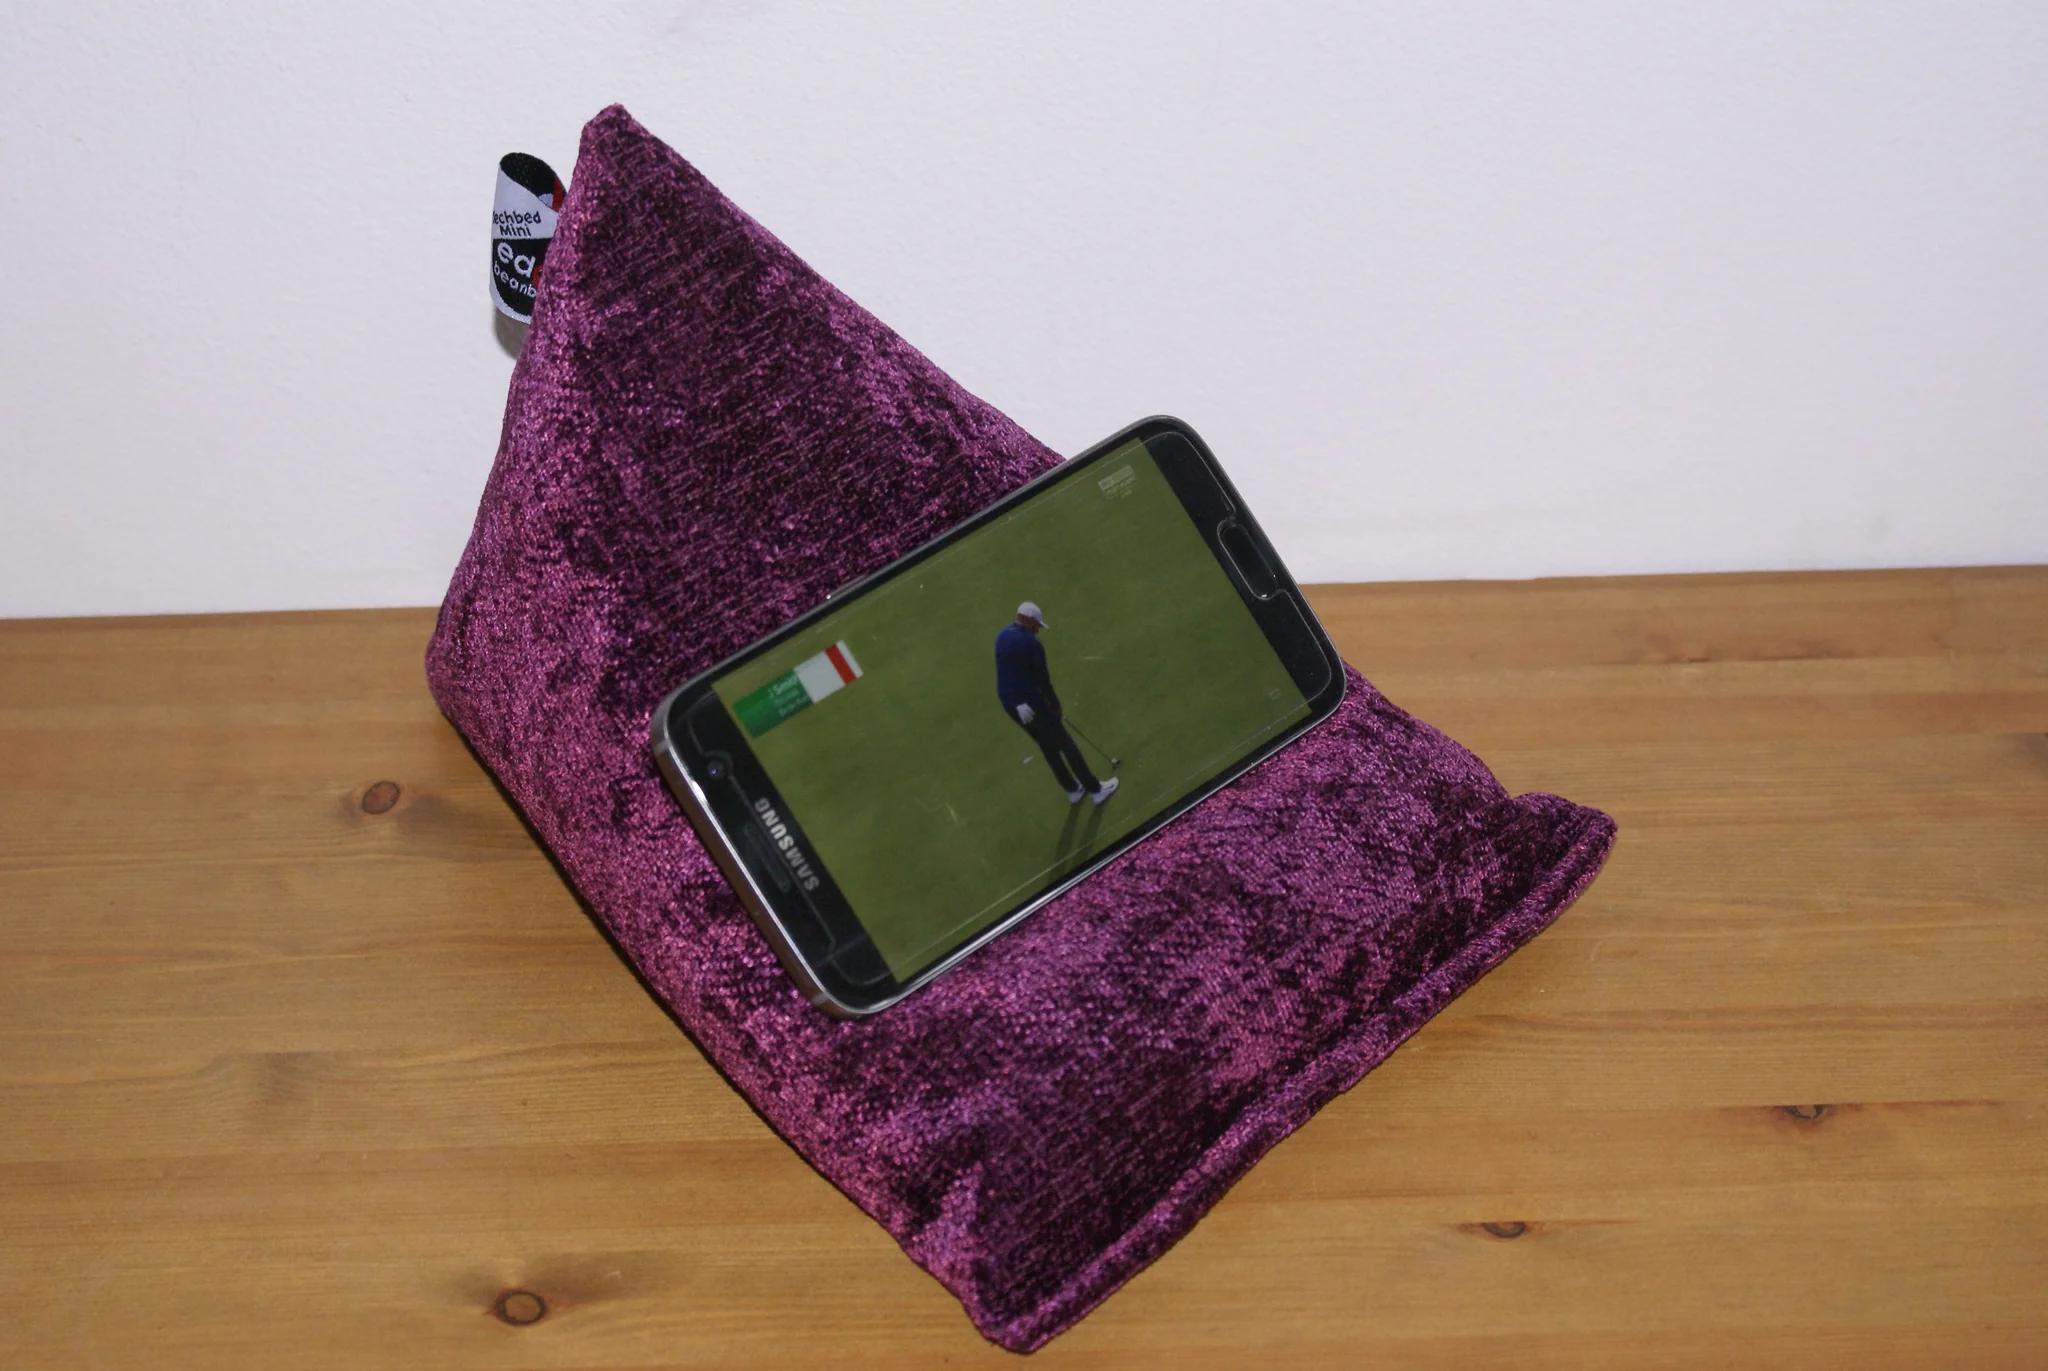 Techbed Mini Beanbag Stand For All Mobile Phones For Zoom, Facetime, Whatsapp Video Or Watching Movi